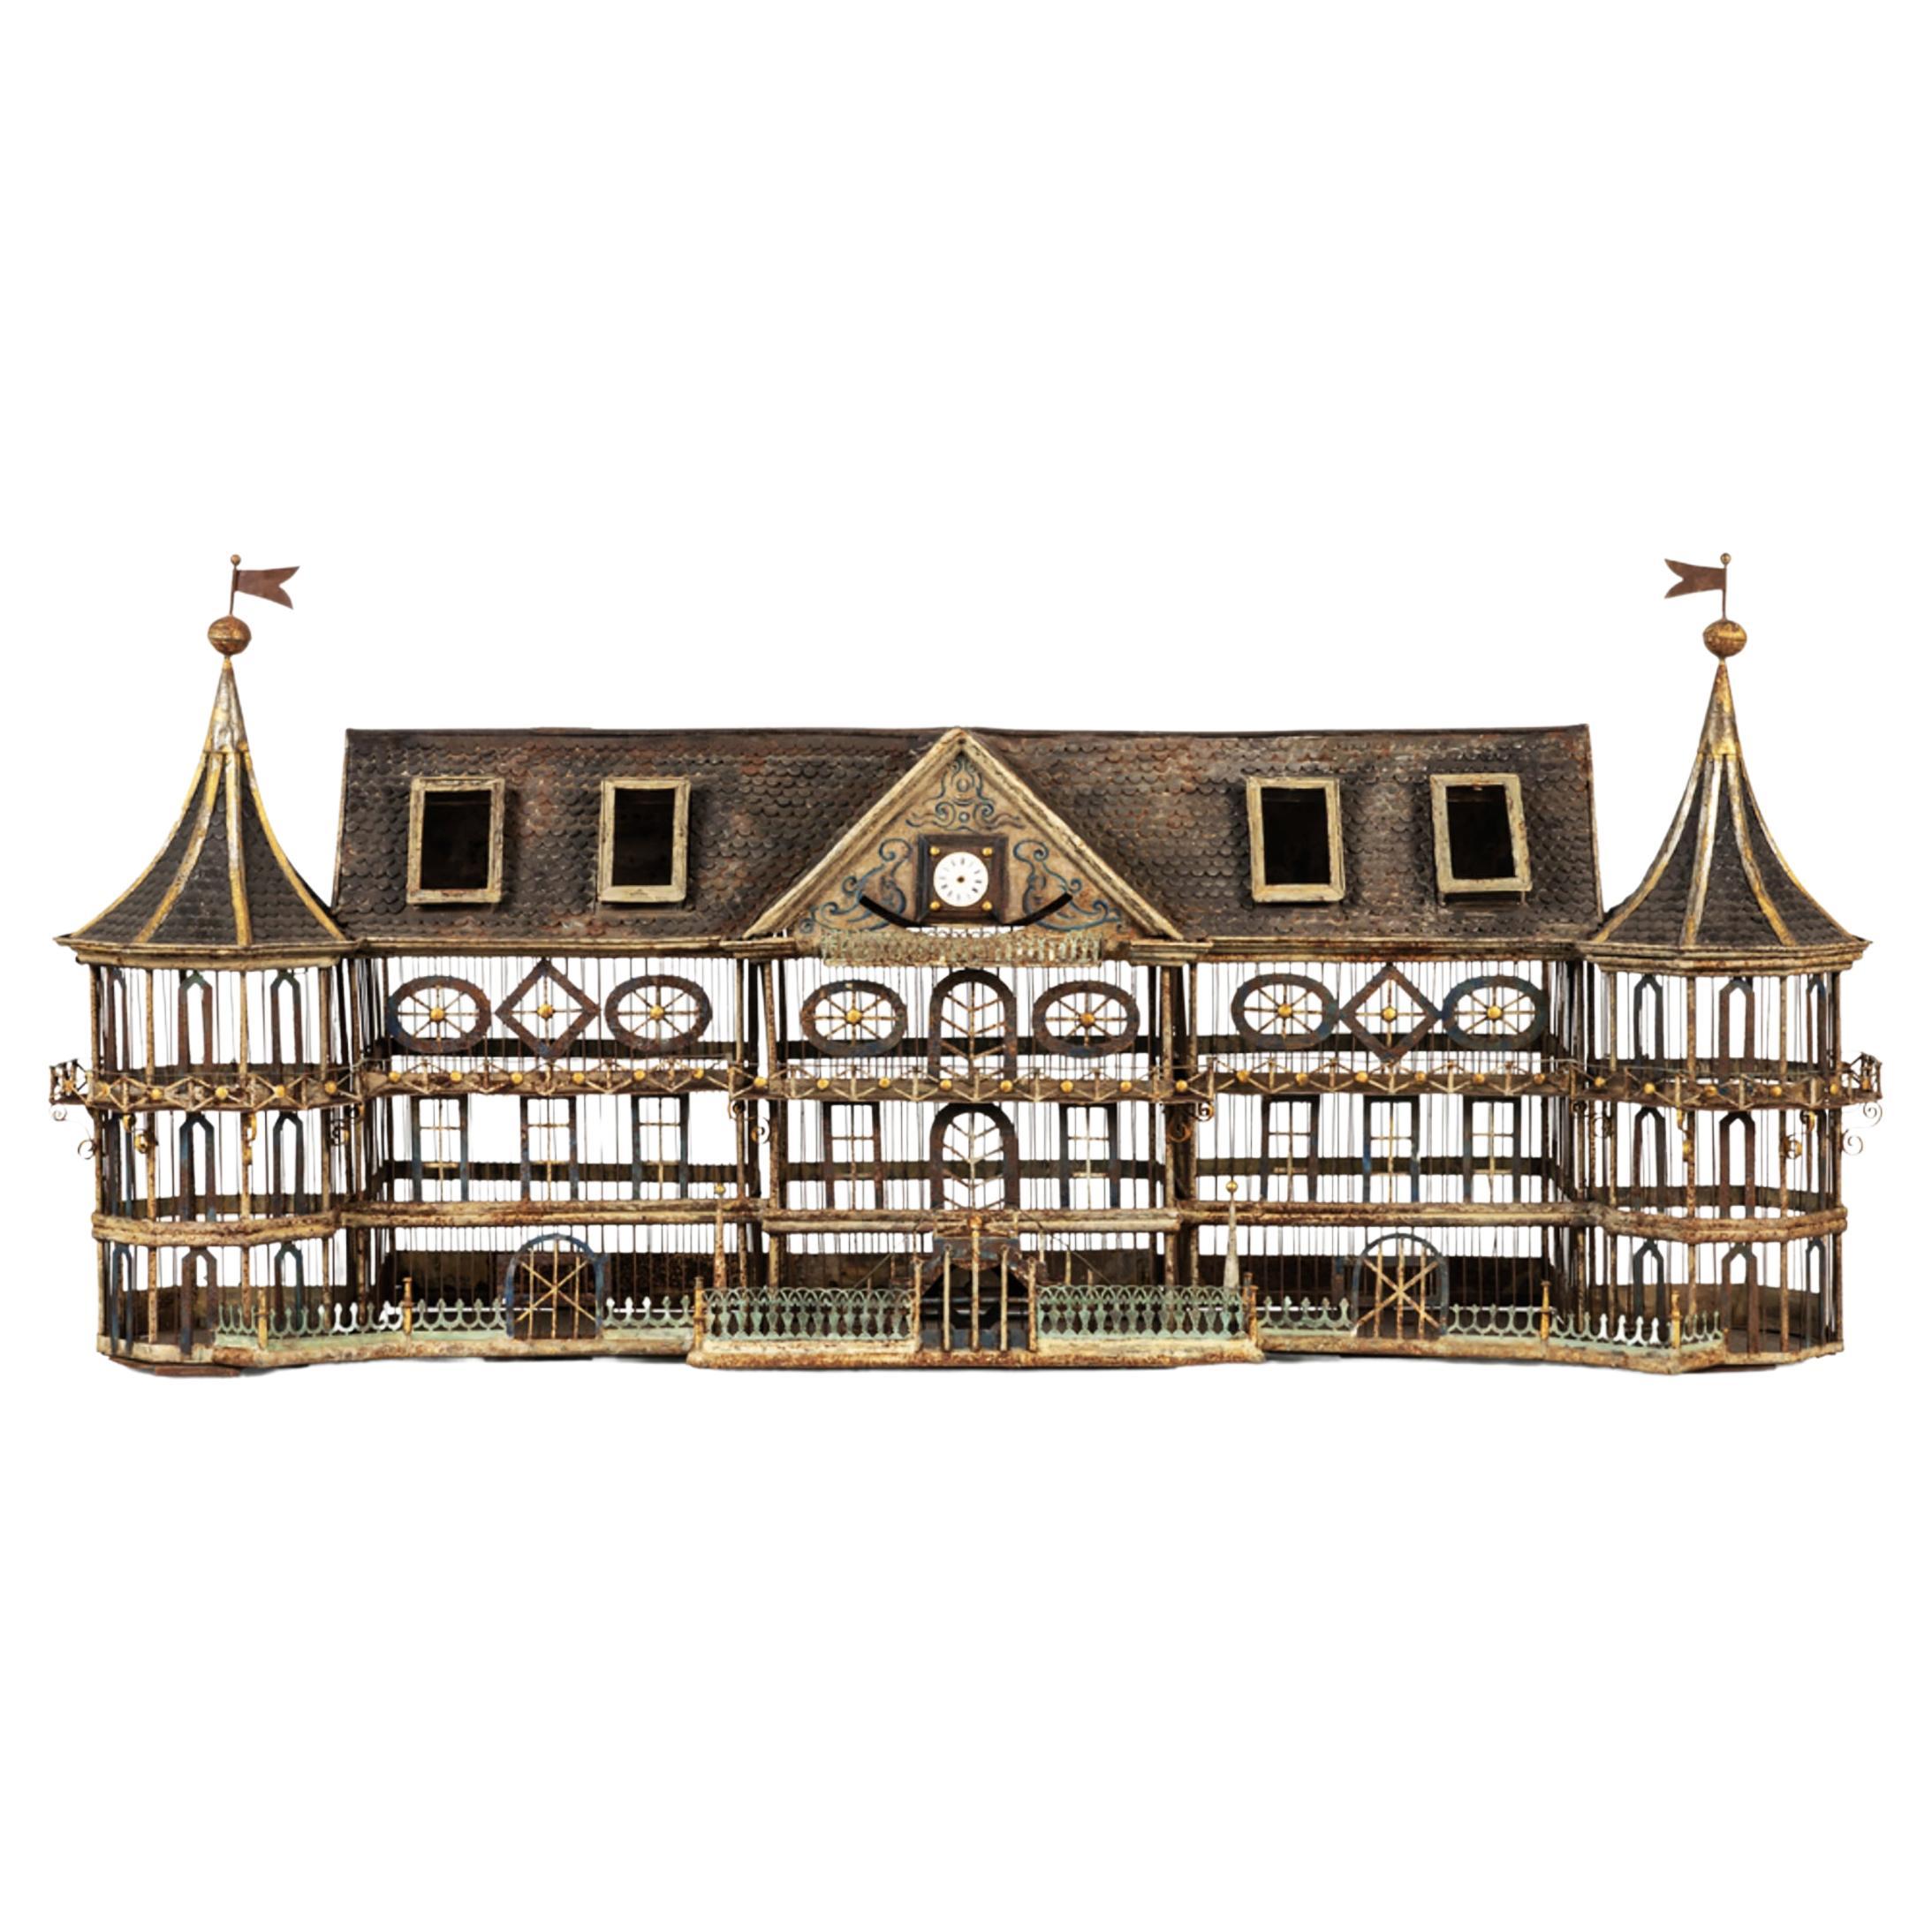 Exceptional sized, this wonderful large vintage birdcage is made of serrated cut iron with decorative friezes all in finesse and delicacy, enhanced with colors and gold. The shape of a fantasy castle pavilion with two side towers topped by flags. In